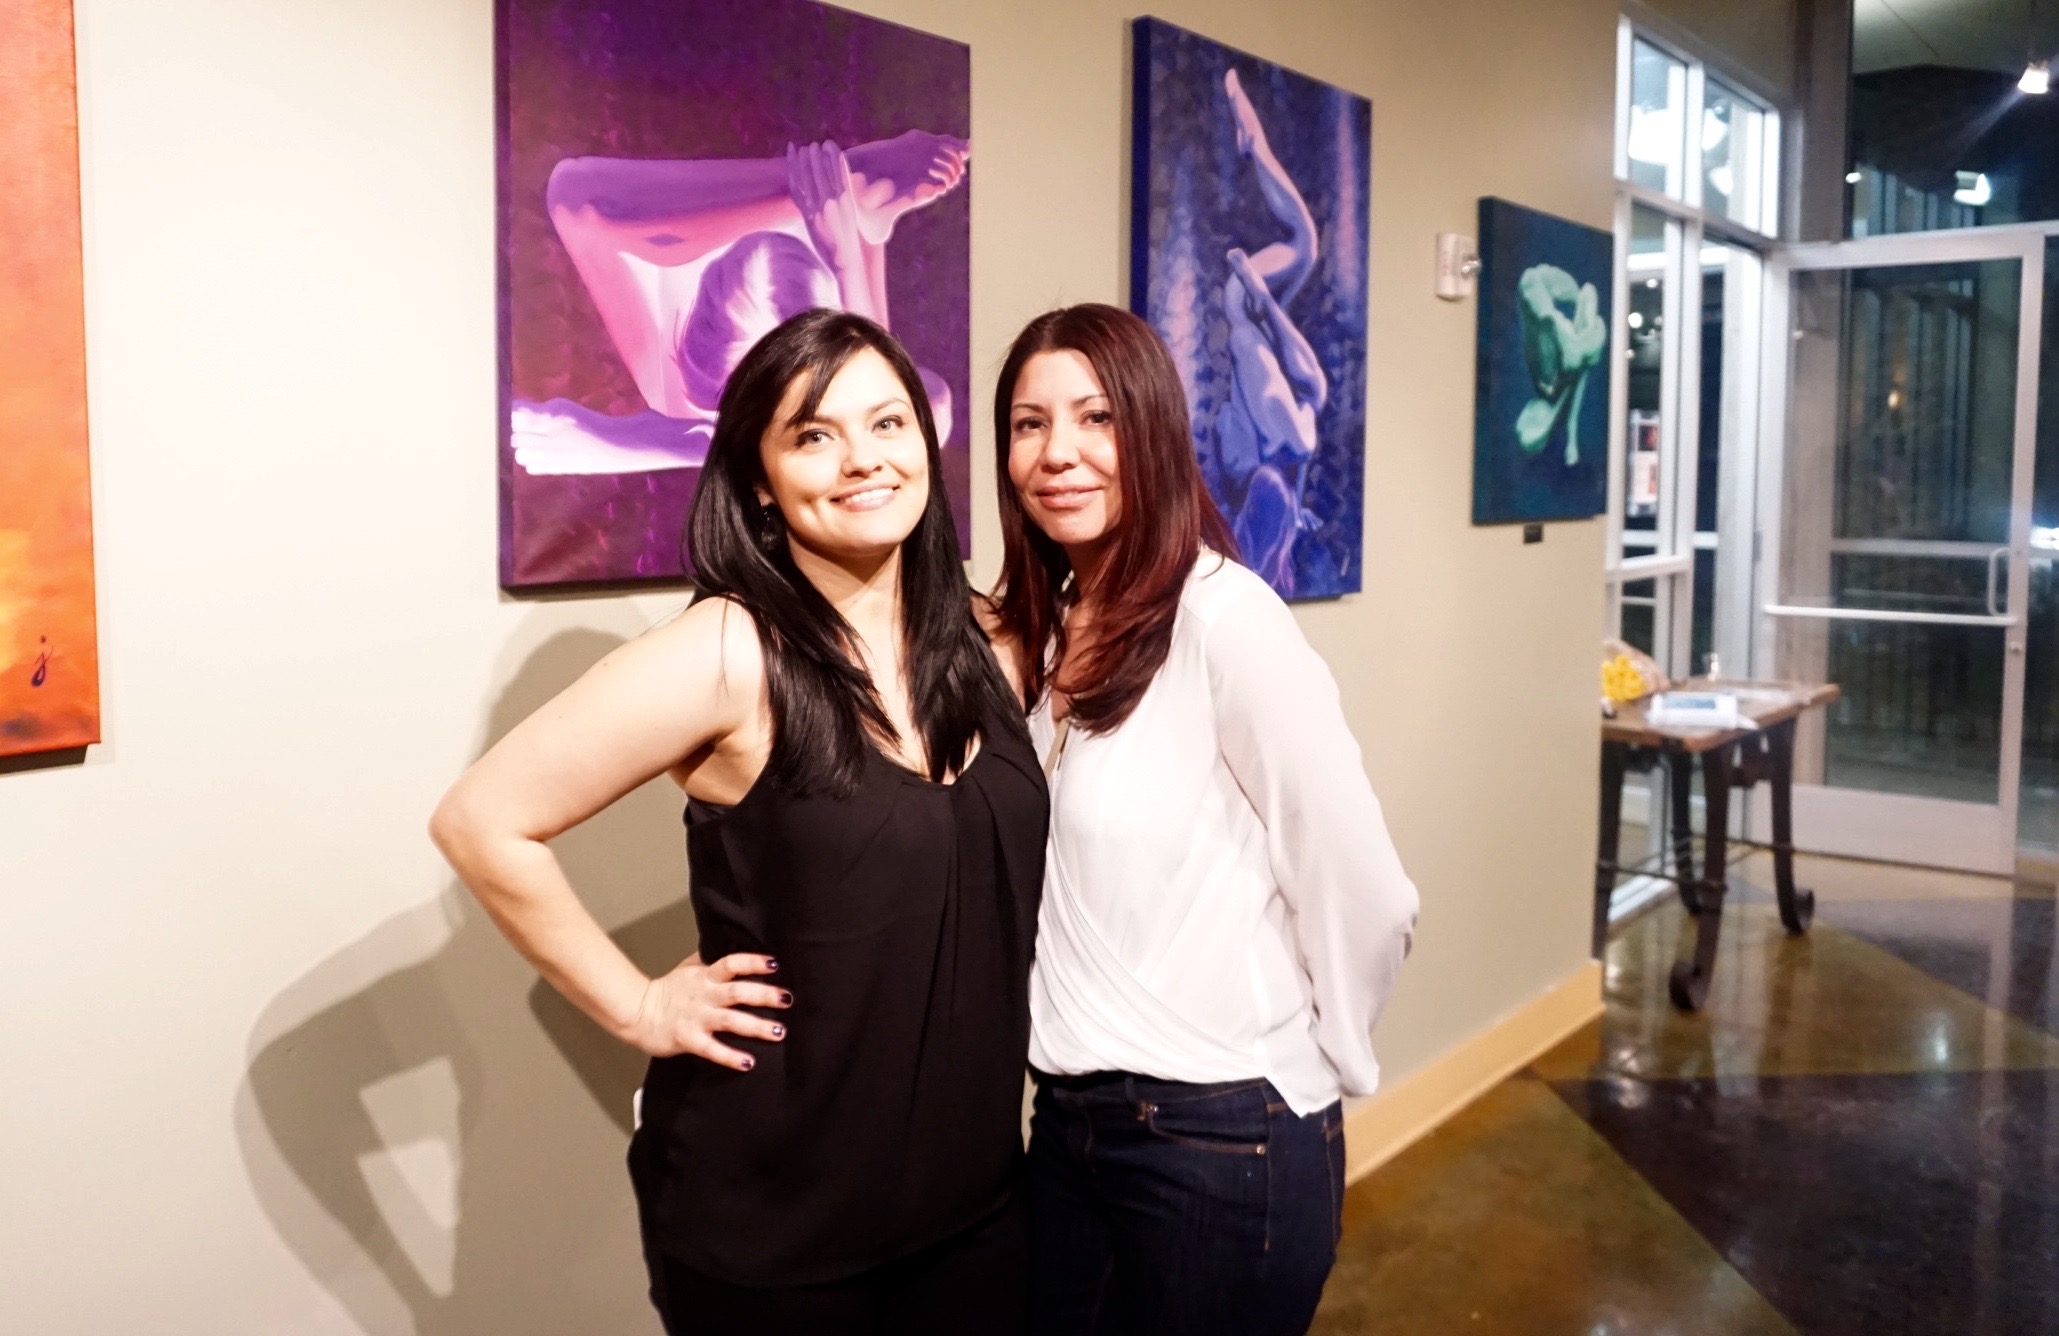 Jenna and Carmen- Long time friend and art collector